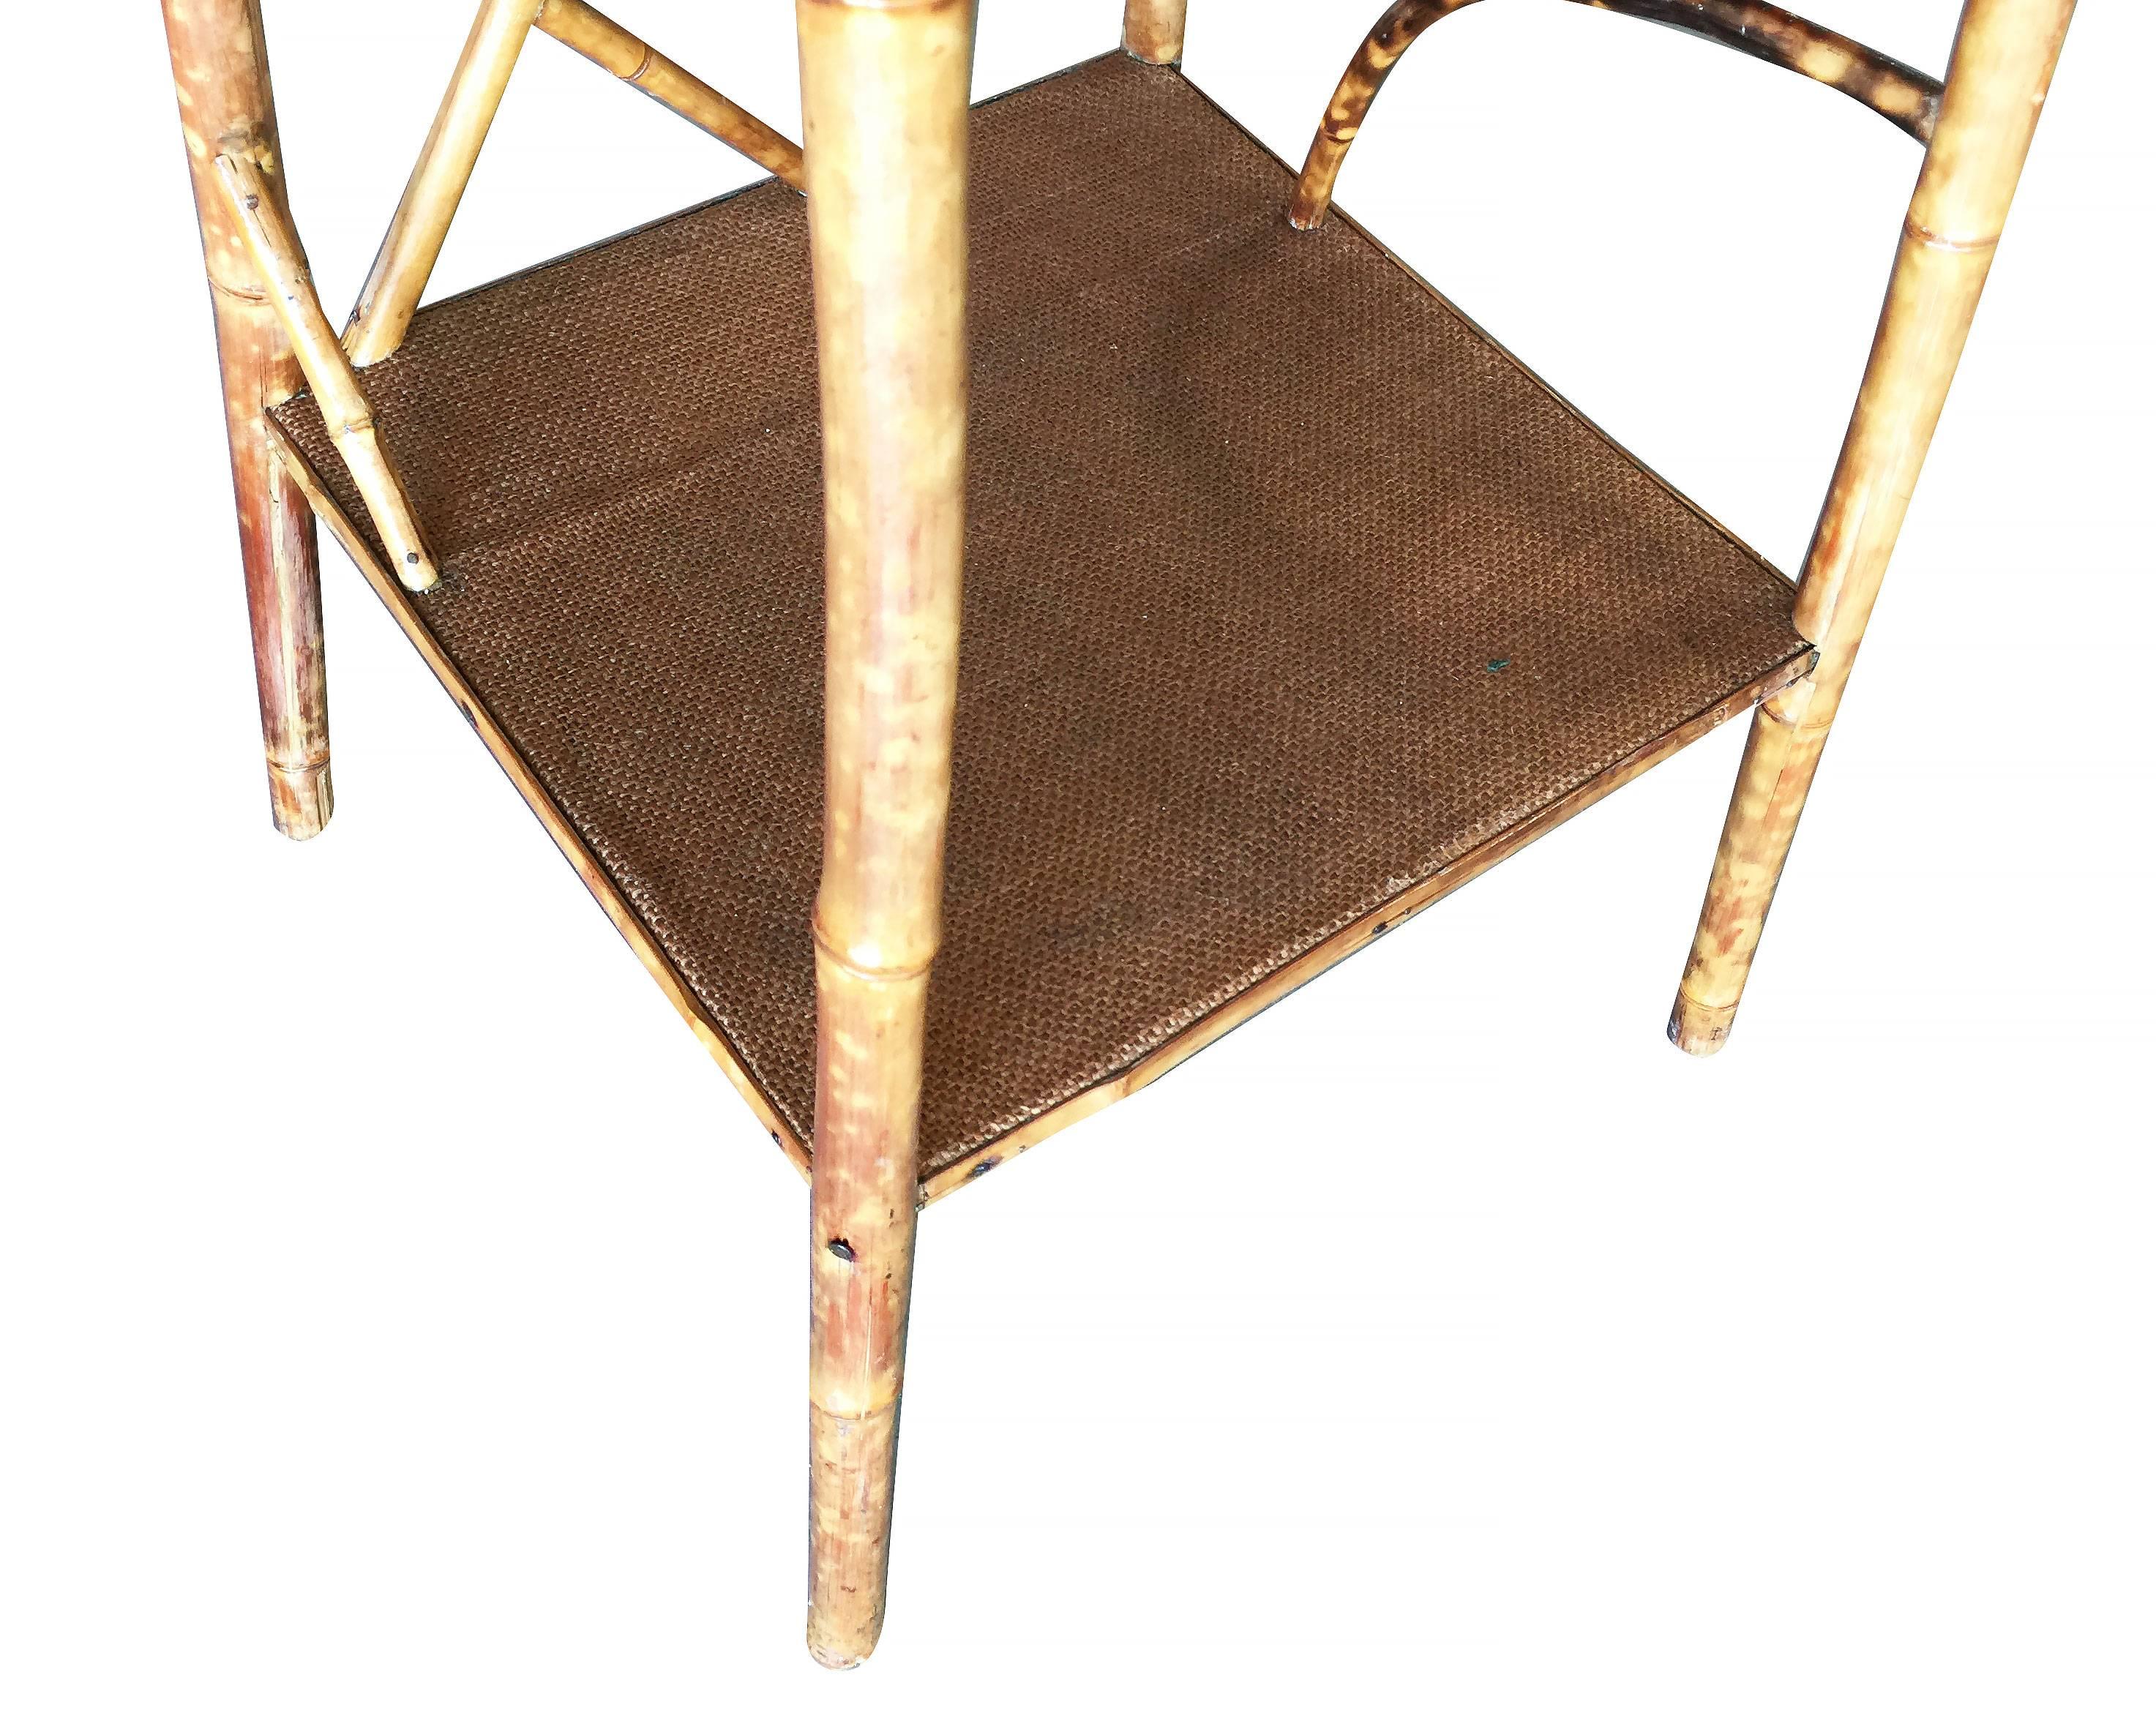 Antique tiger bamboo pedestal side table with rice mat top, organically formed accents and secondary bottom shelf.


Restored to new for you.

All rattan, bamboo and wicker furniture has been painstakingly refurbished to the highest standards with